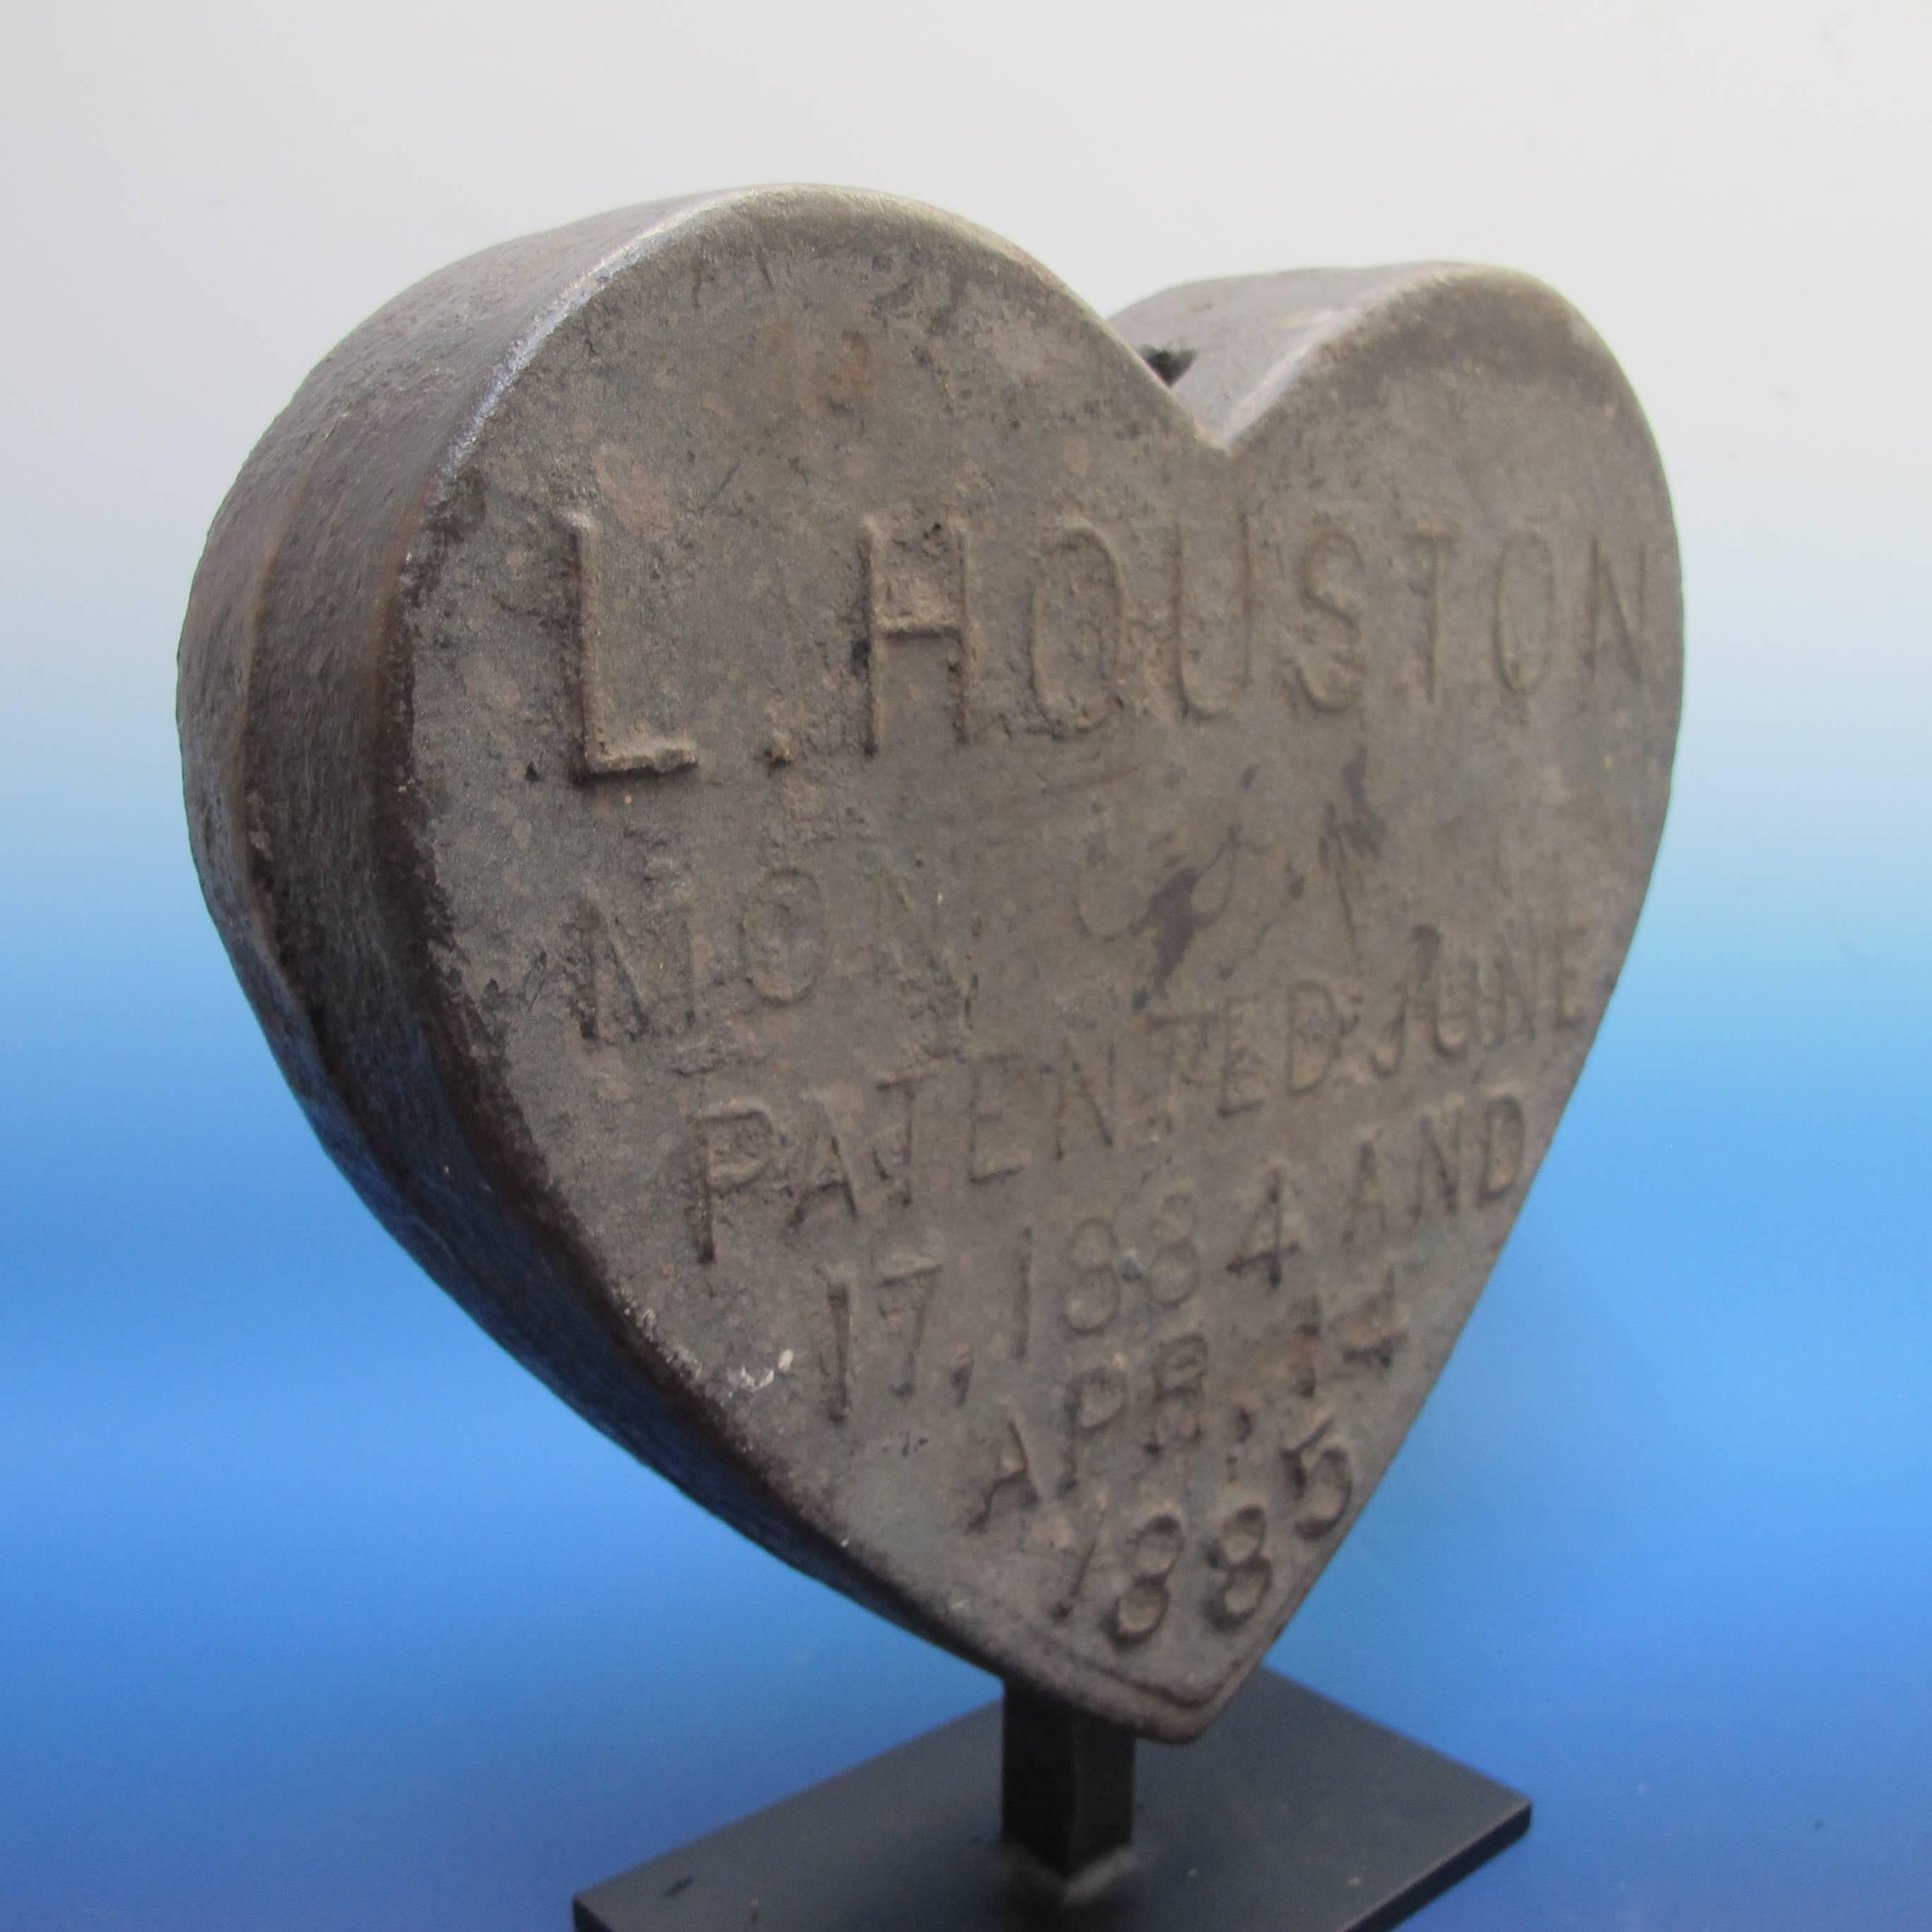 Rare windmill counter weight made to be fixed to the windmills seen on farms in the 19th century. He heart form is one of the most desirable forms and is rarely found.
One side of the heart has the name of the maker and the patent date of